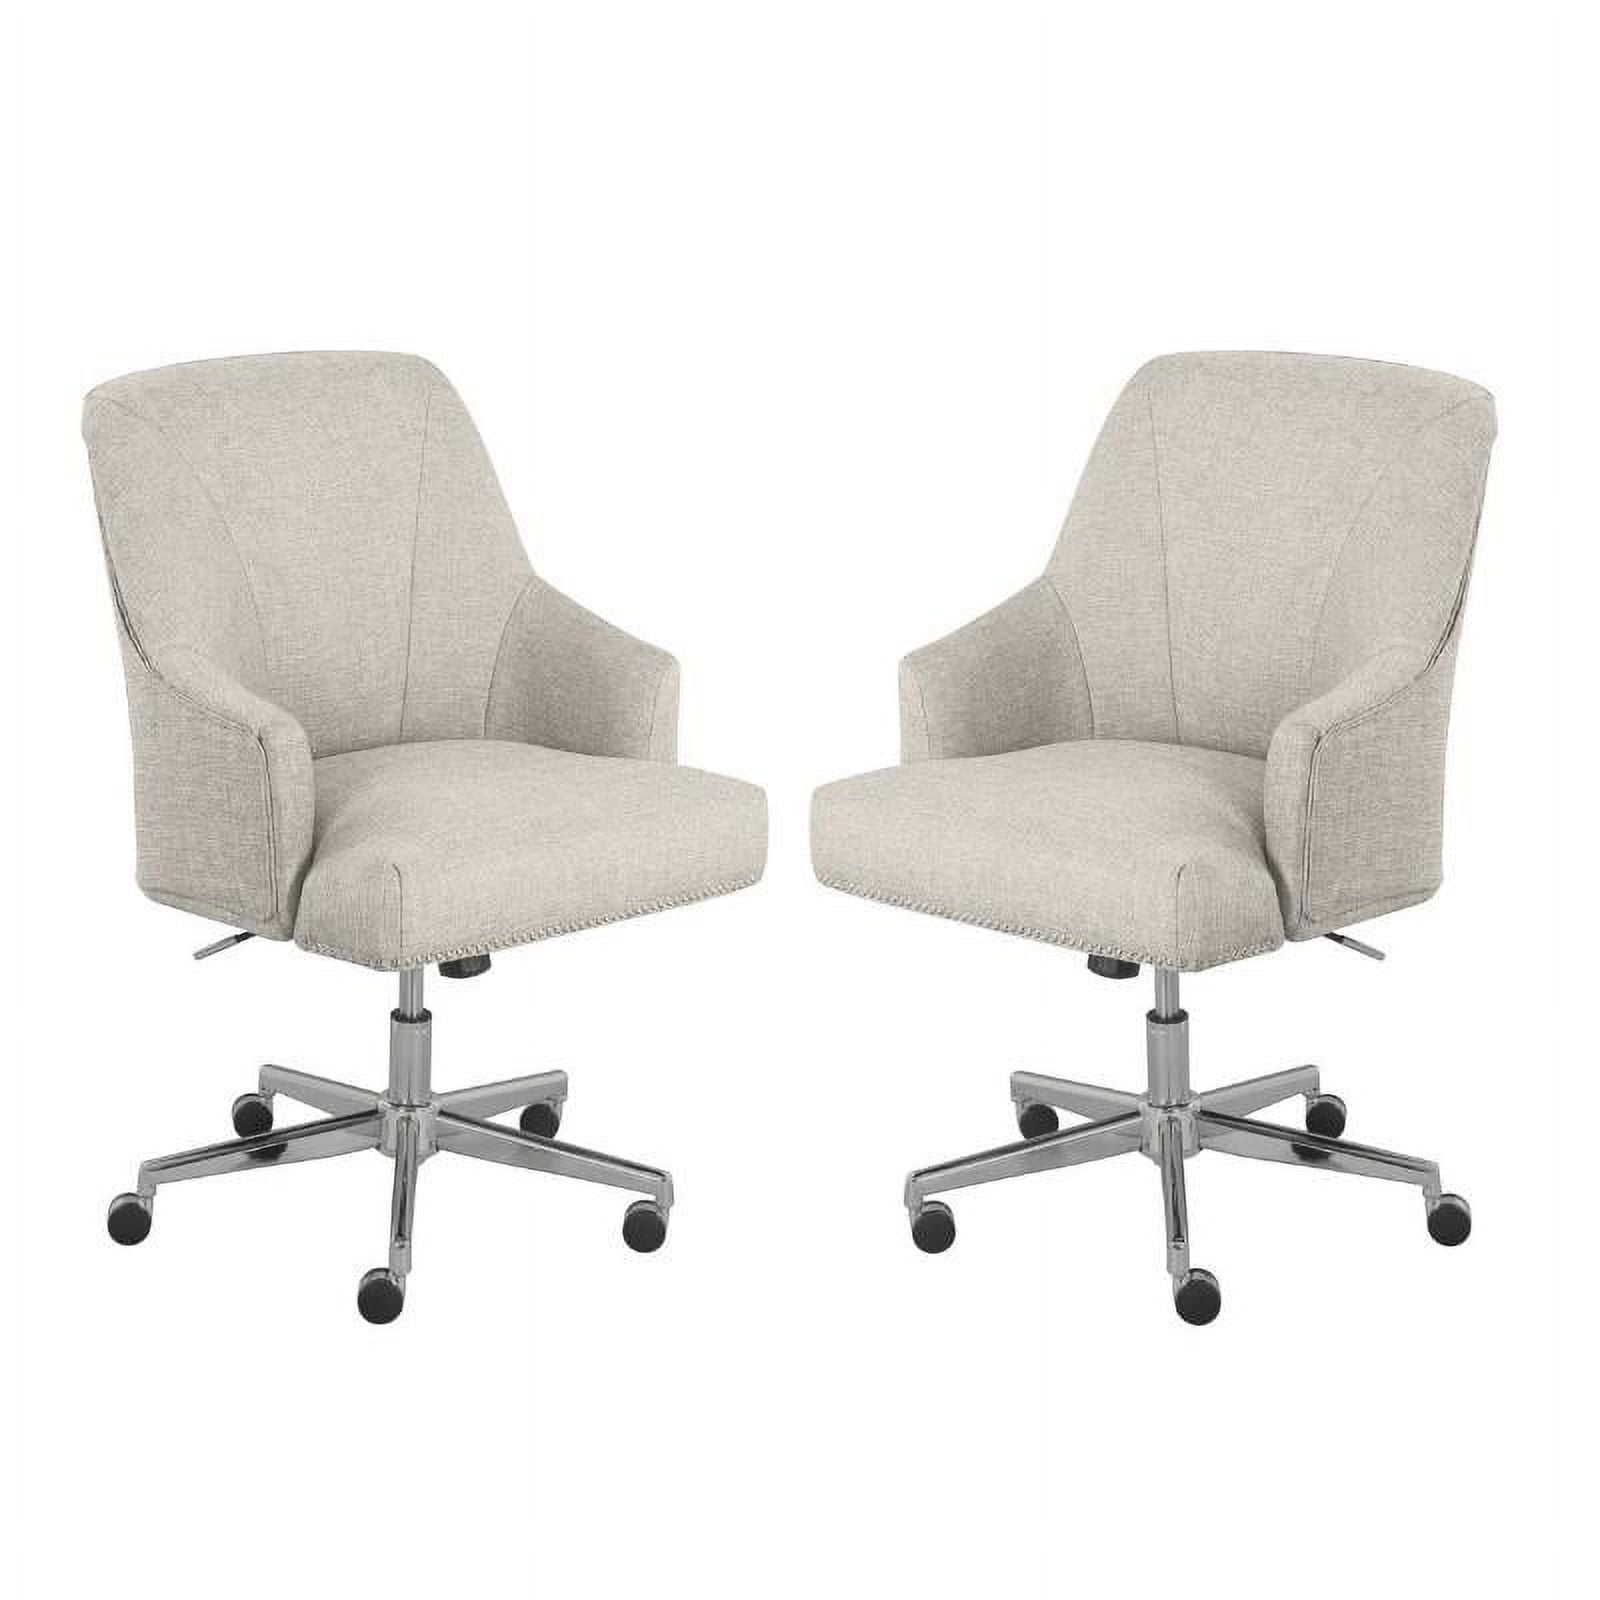 Home Square 2 Piece Swivel Linen Office Chair Set in Light Gray